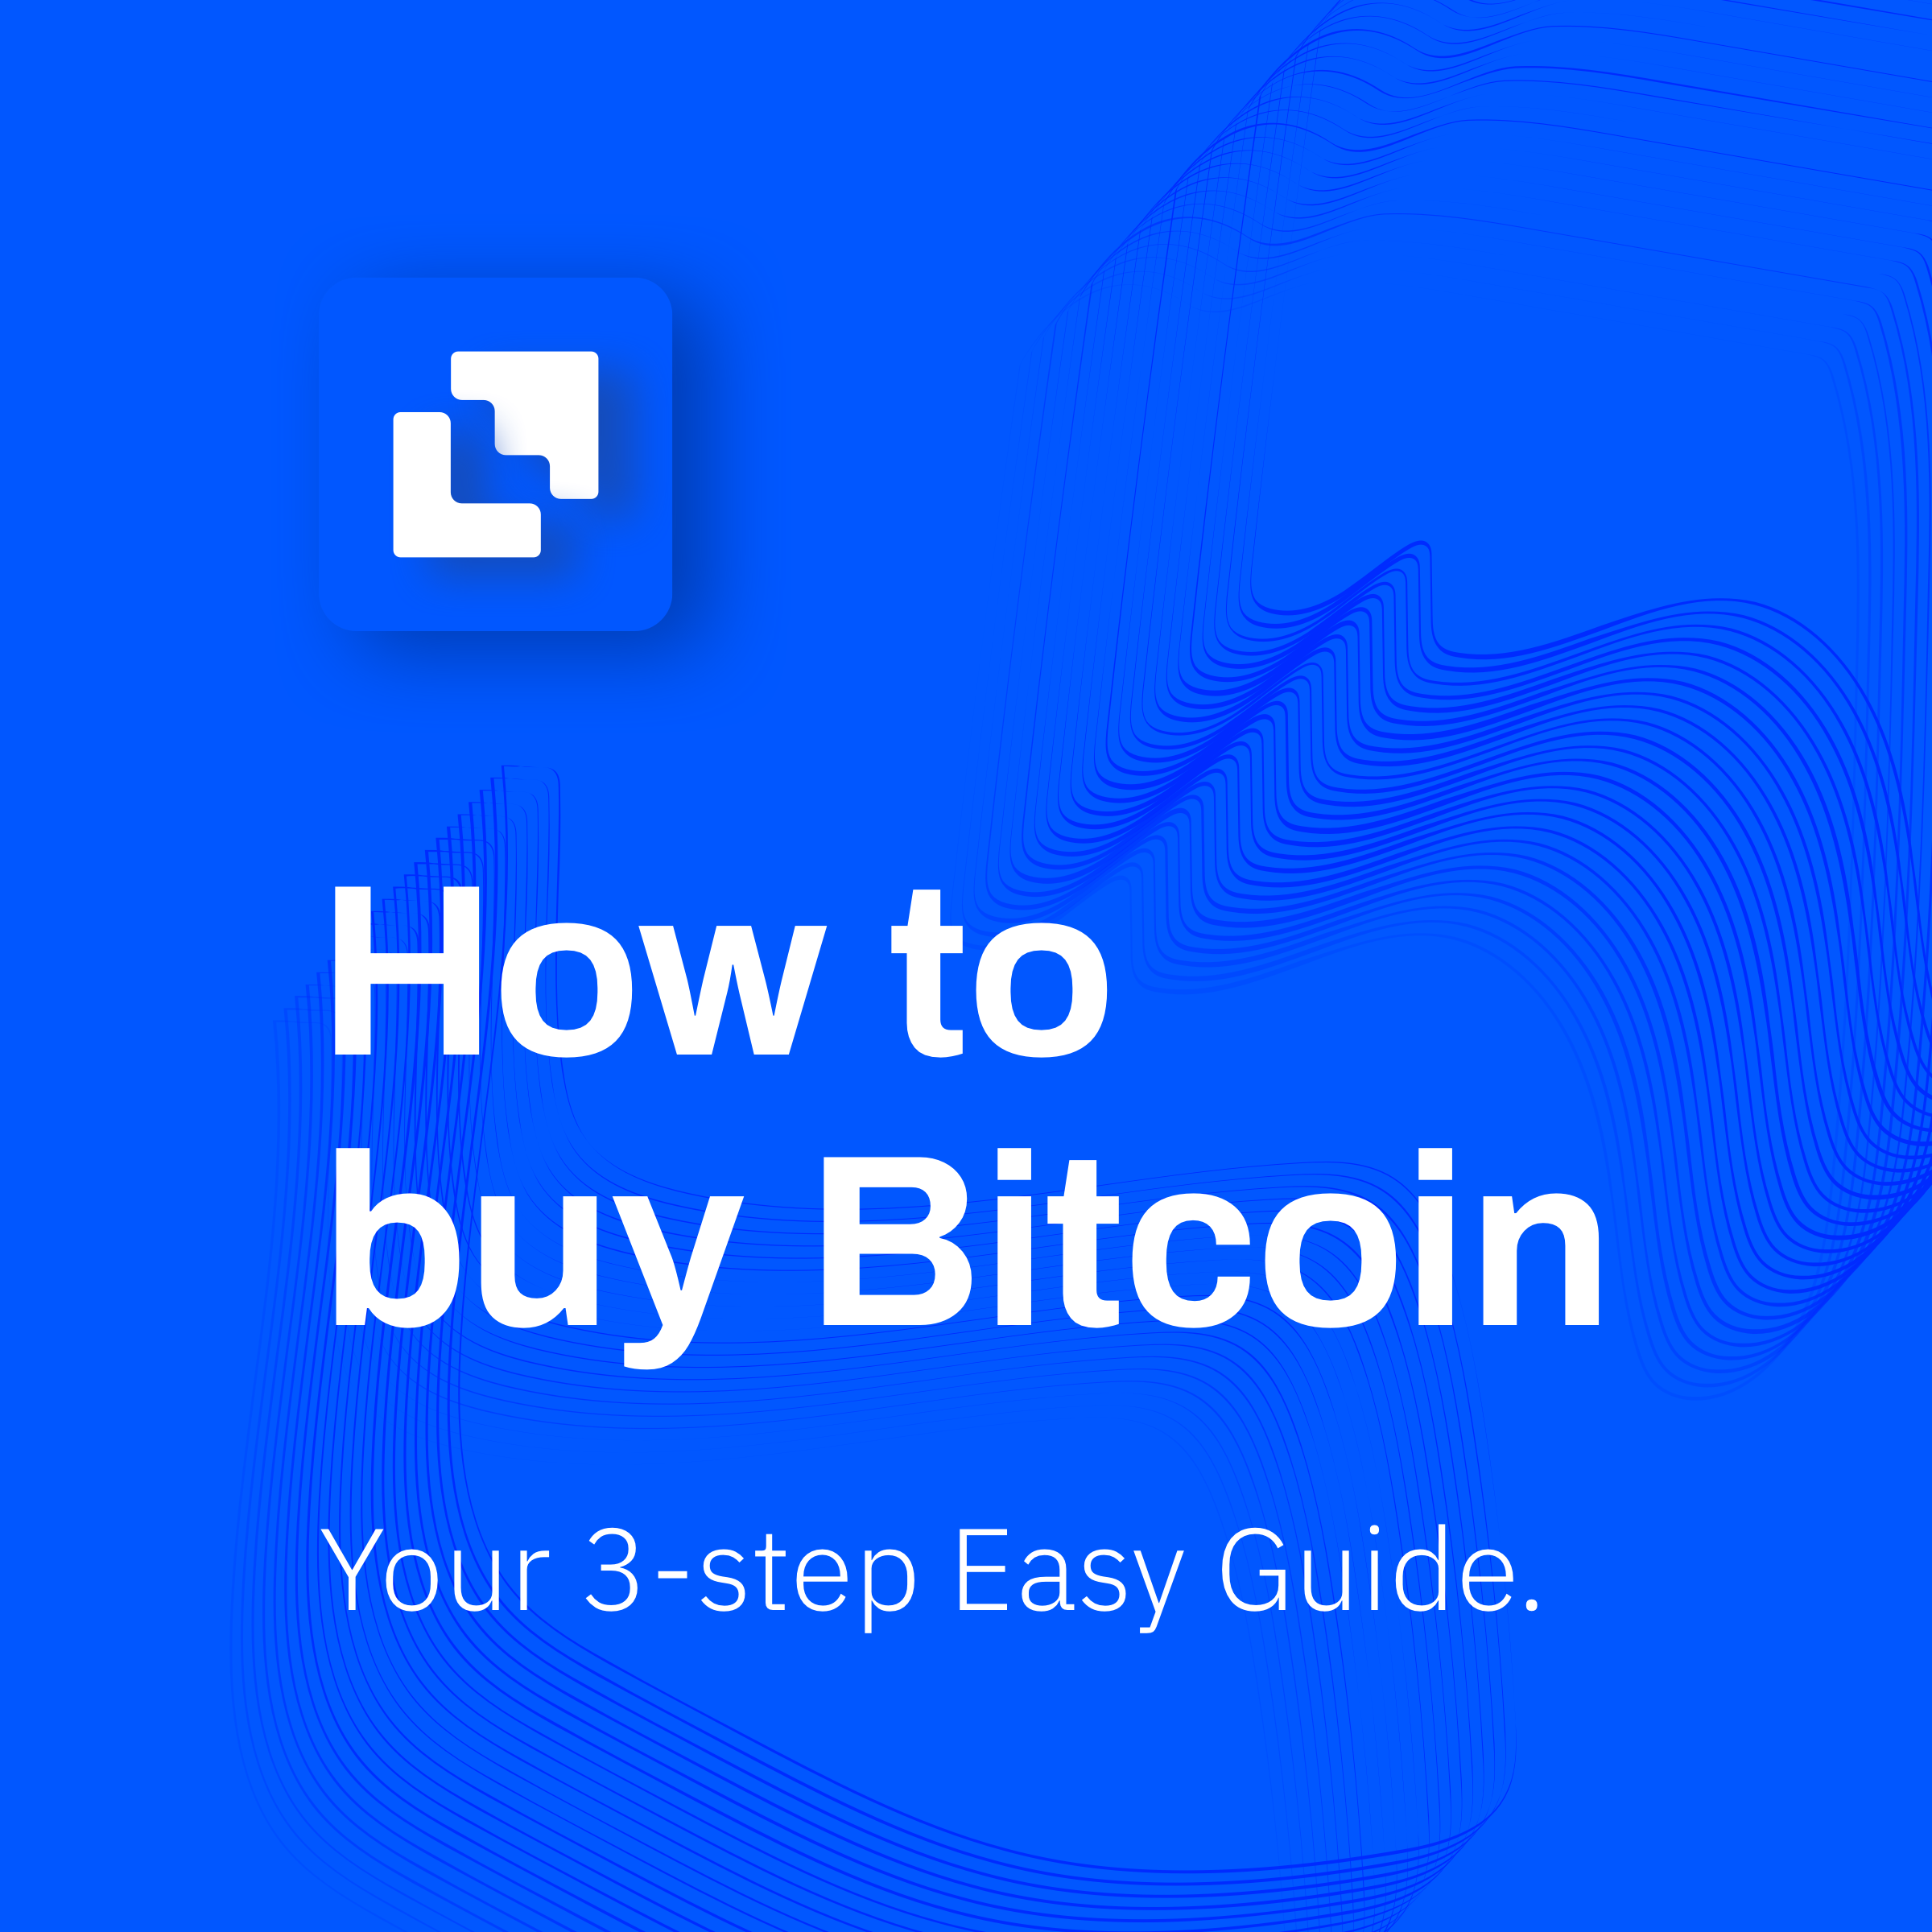 what can you buy in bitcoins